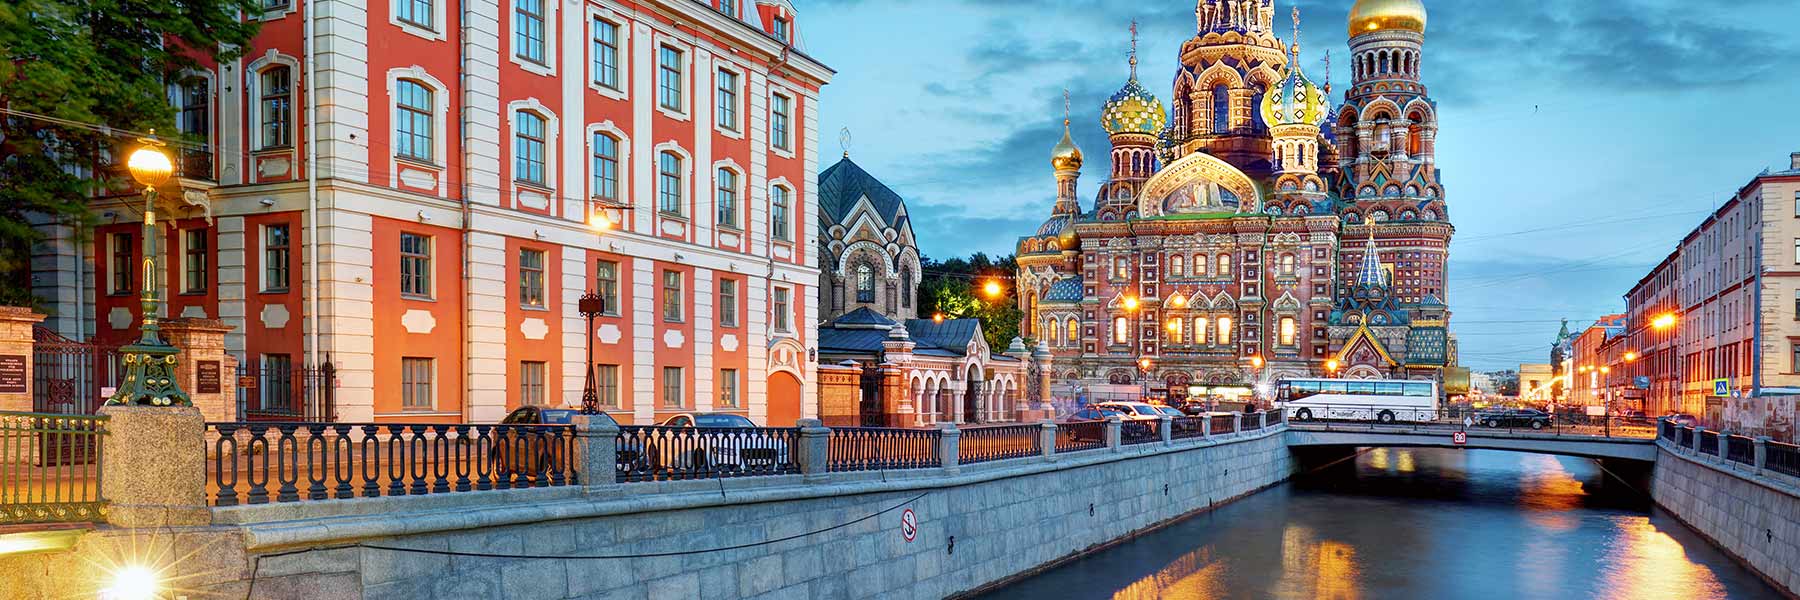 View of St. Petersburg's Church of the Saviour on Spilled Blood seen across a river